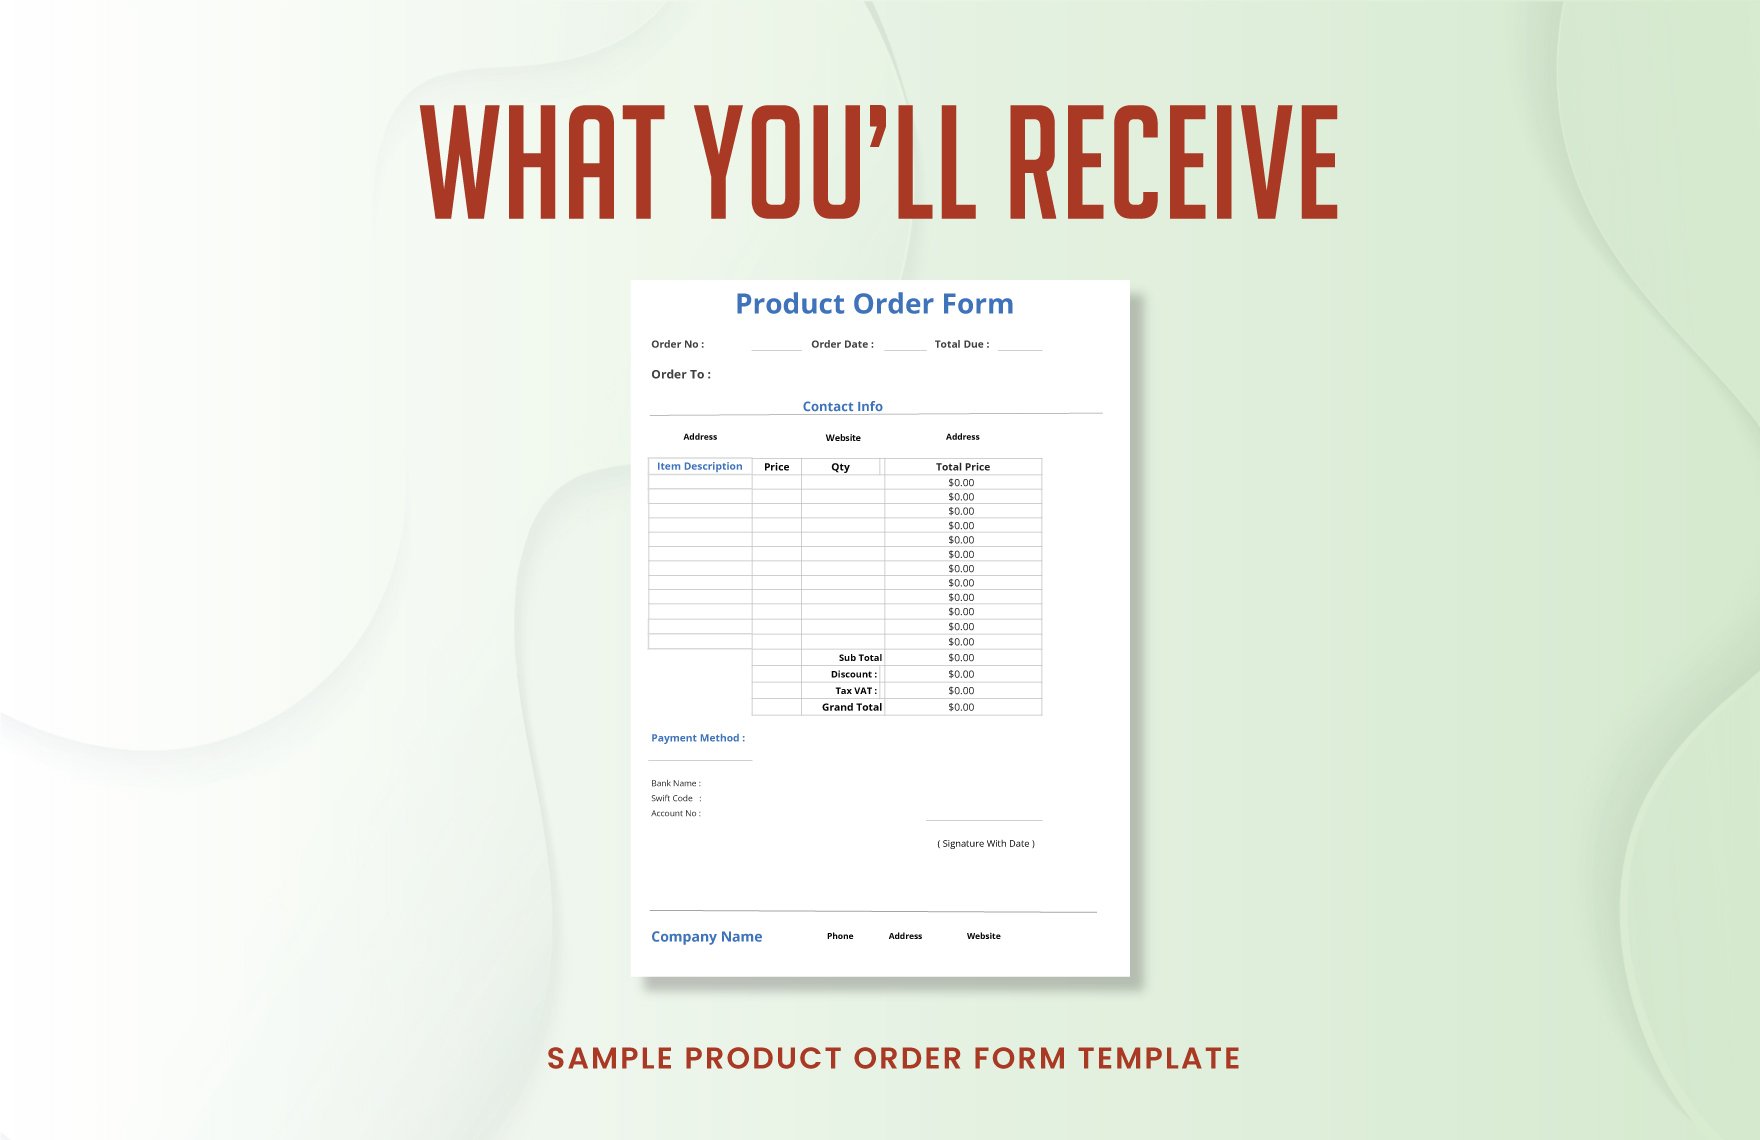 Sample Product Order Form Template